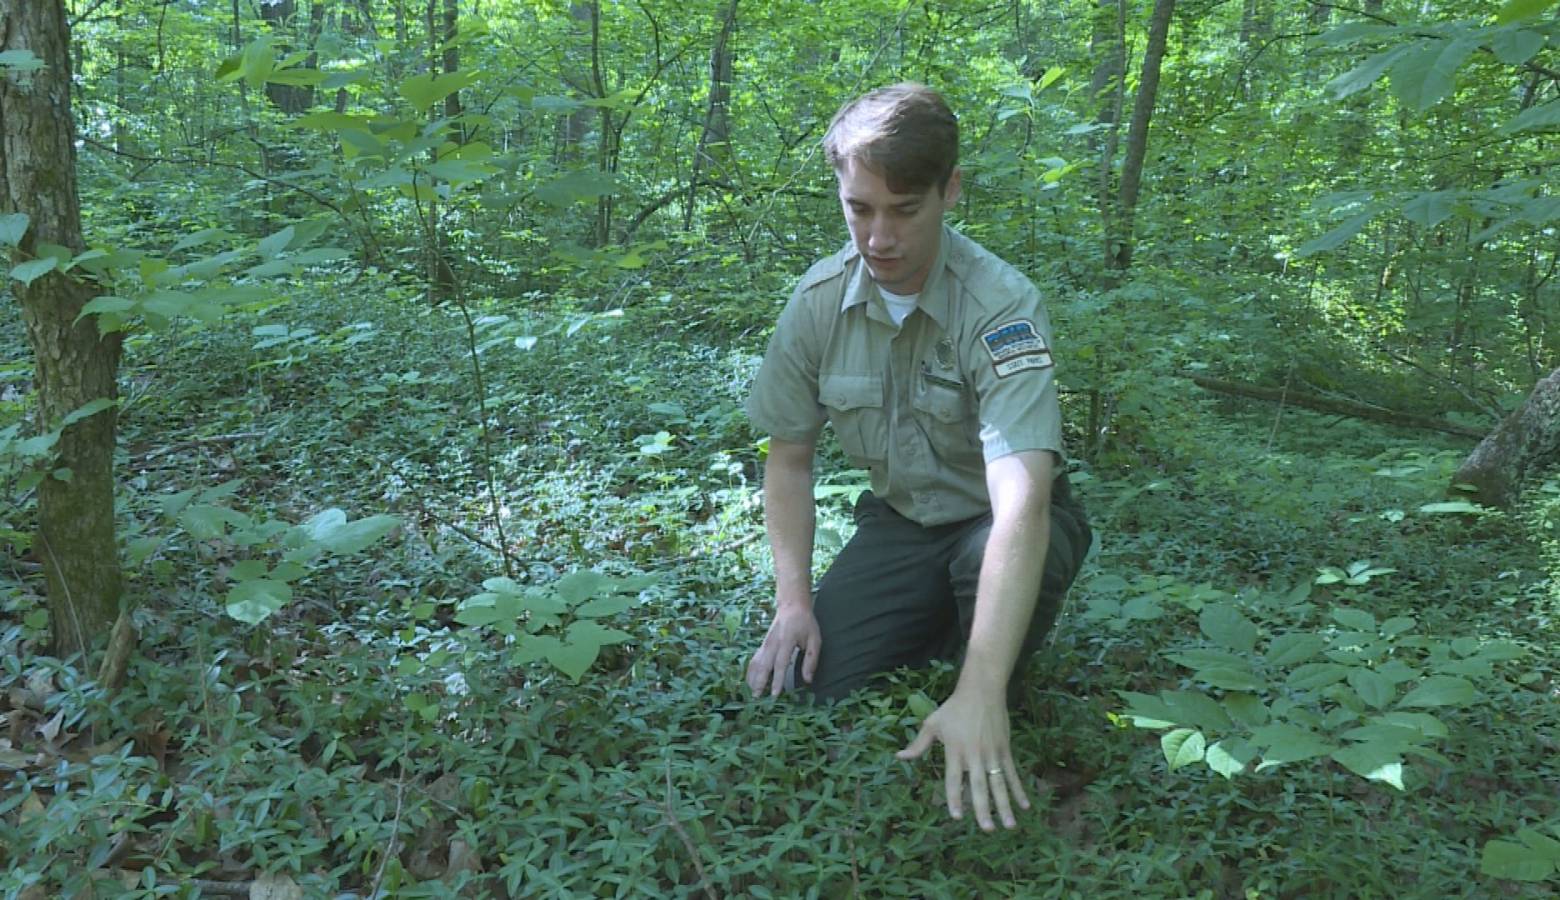 Wyatt Willliams, interpretive naturalist at Spring Mill State Park, kneels down in a patch of invasive periwinkle. He says it was planted there as a ground cover. (Rebecca Thiele/IPB News)